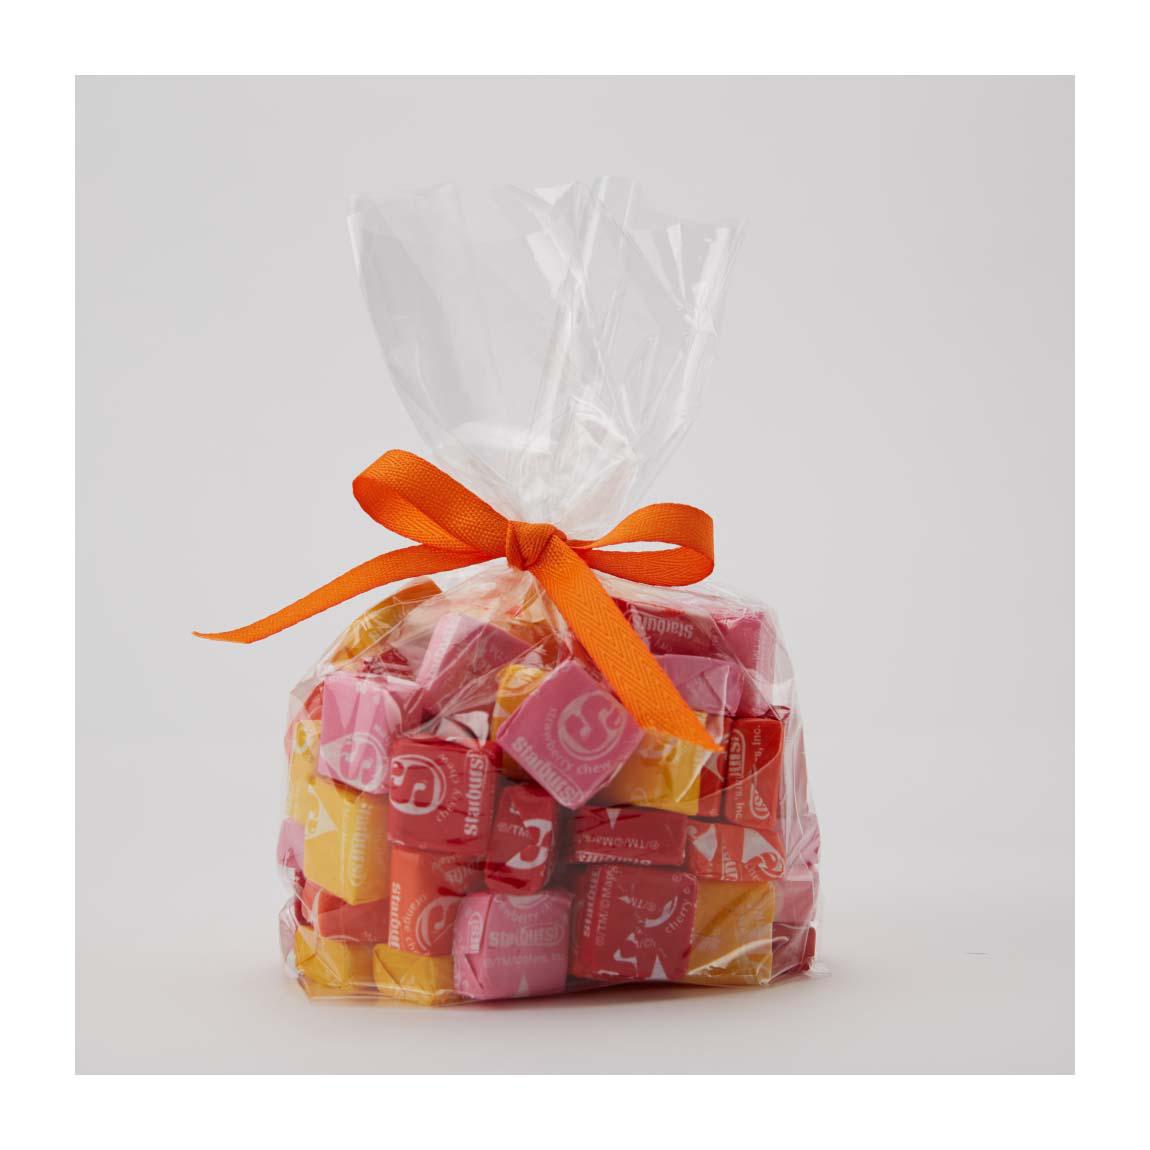 Starburst All Pink Fruit Chews Candy Bag; image 2 of 7